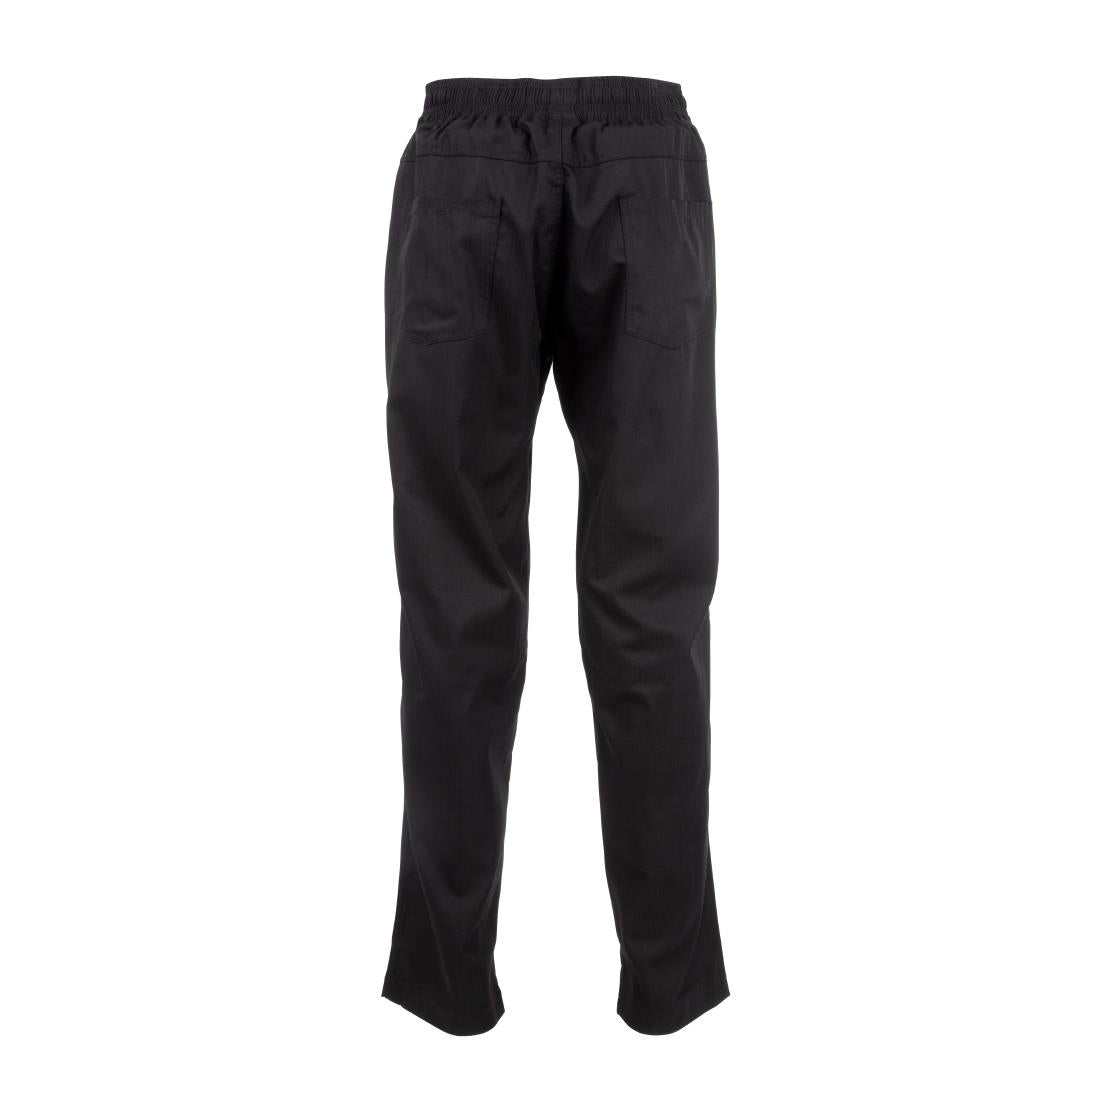 A695-S Chef Works Unisex Better Built Baggy Chefs Trousers Black S